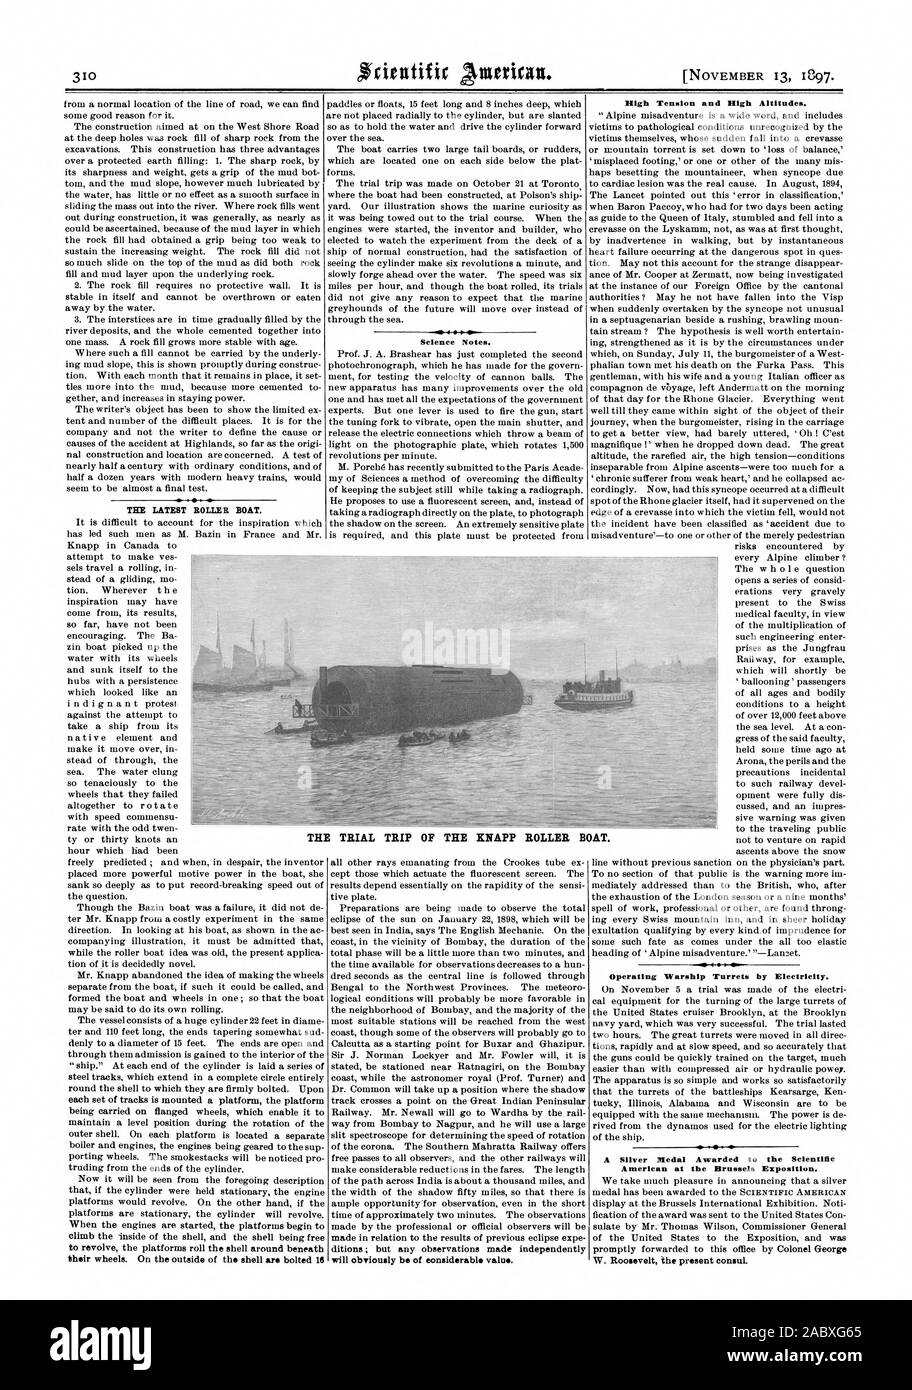 TEE LATEST BOLLES. BOAT. their wheels. On the outside of the shell are bolted 16 Science Notes. will obviously be of considerable value. High Tension and High Altitudes. Operating Warship Turrets by Electricity. A Silver Medal Awarded to the Scientific American at the Brussels Exposition. W. Roosevelt the present consul. THE TRIAL TRIP OF THE KNAPP ROLLER BOAT., 1897-11-13 Stock Photo